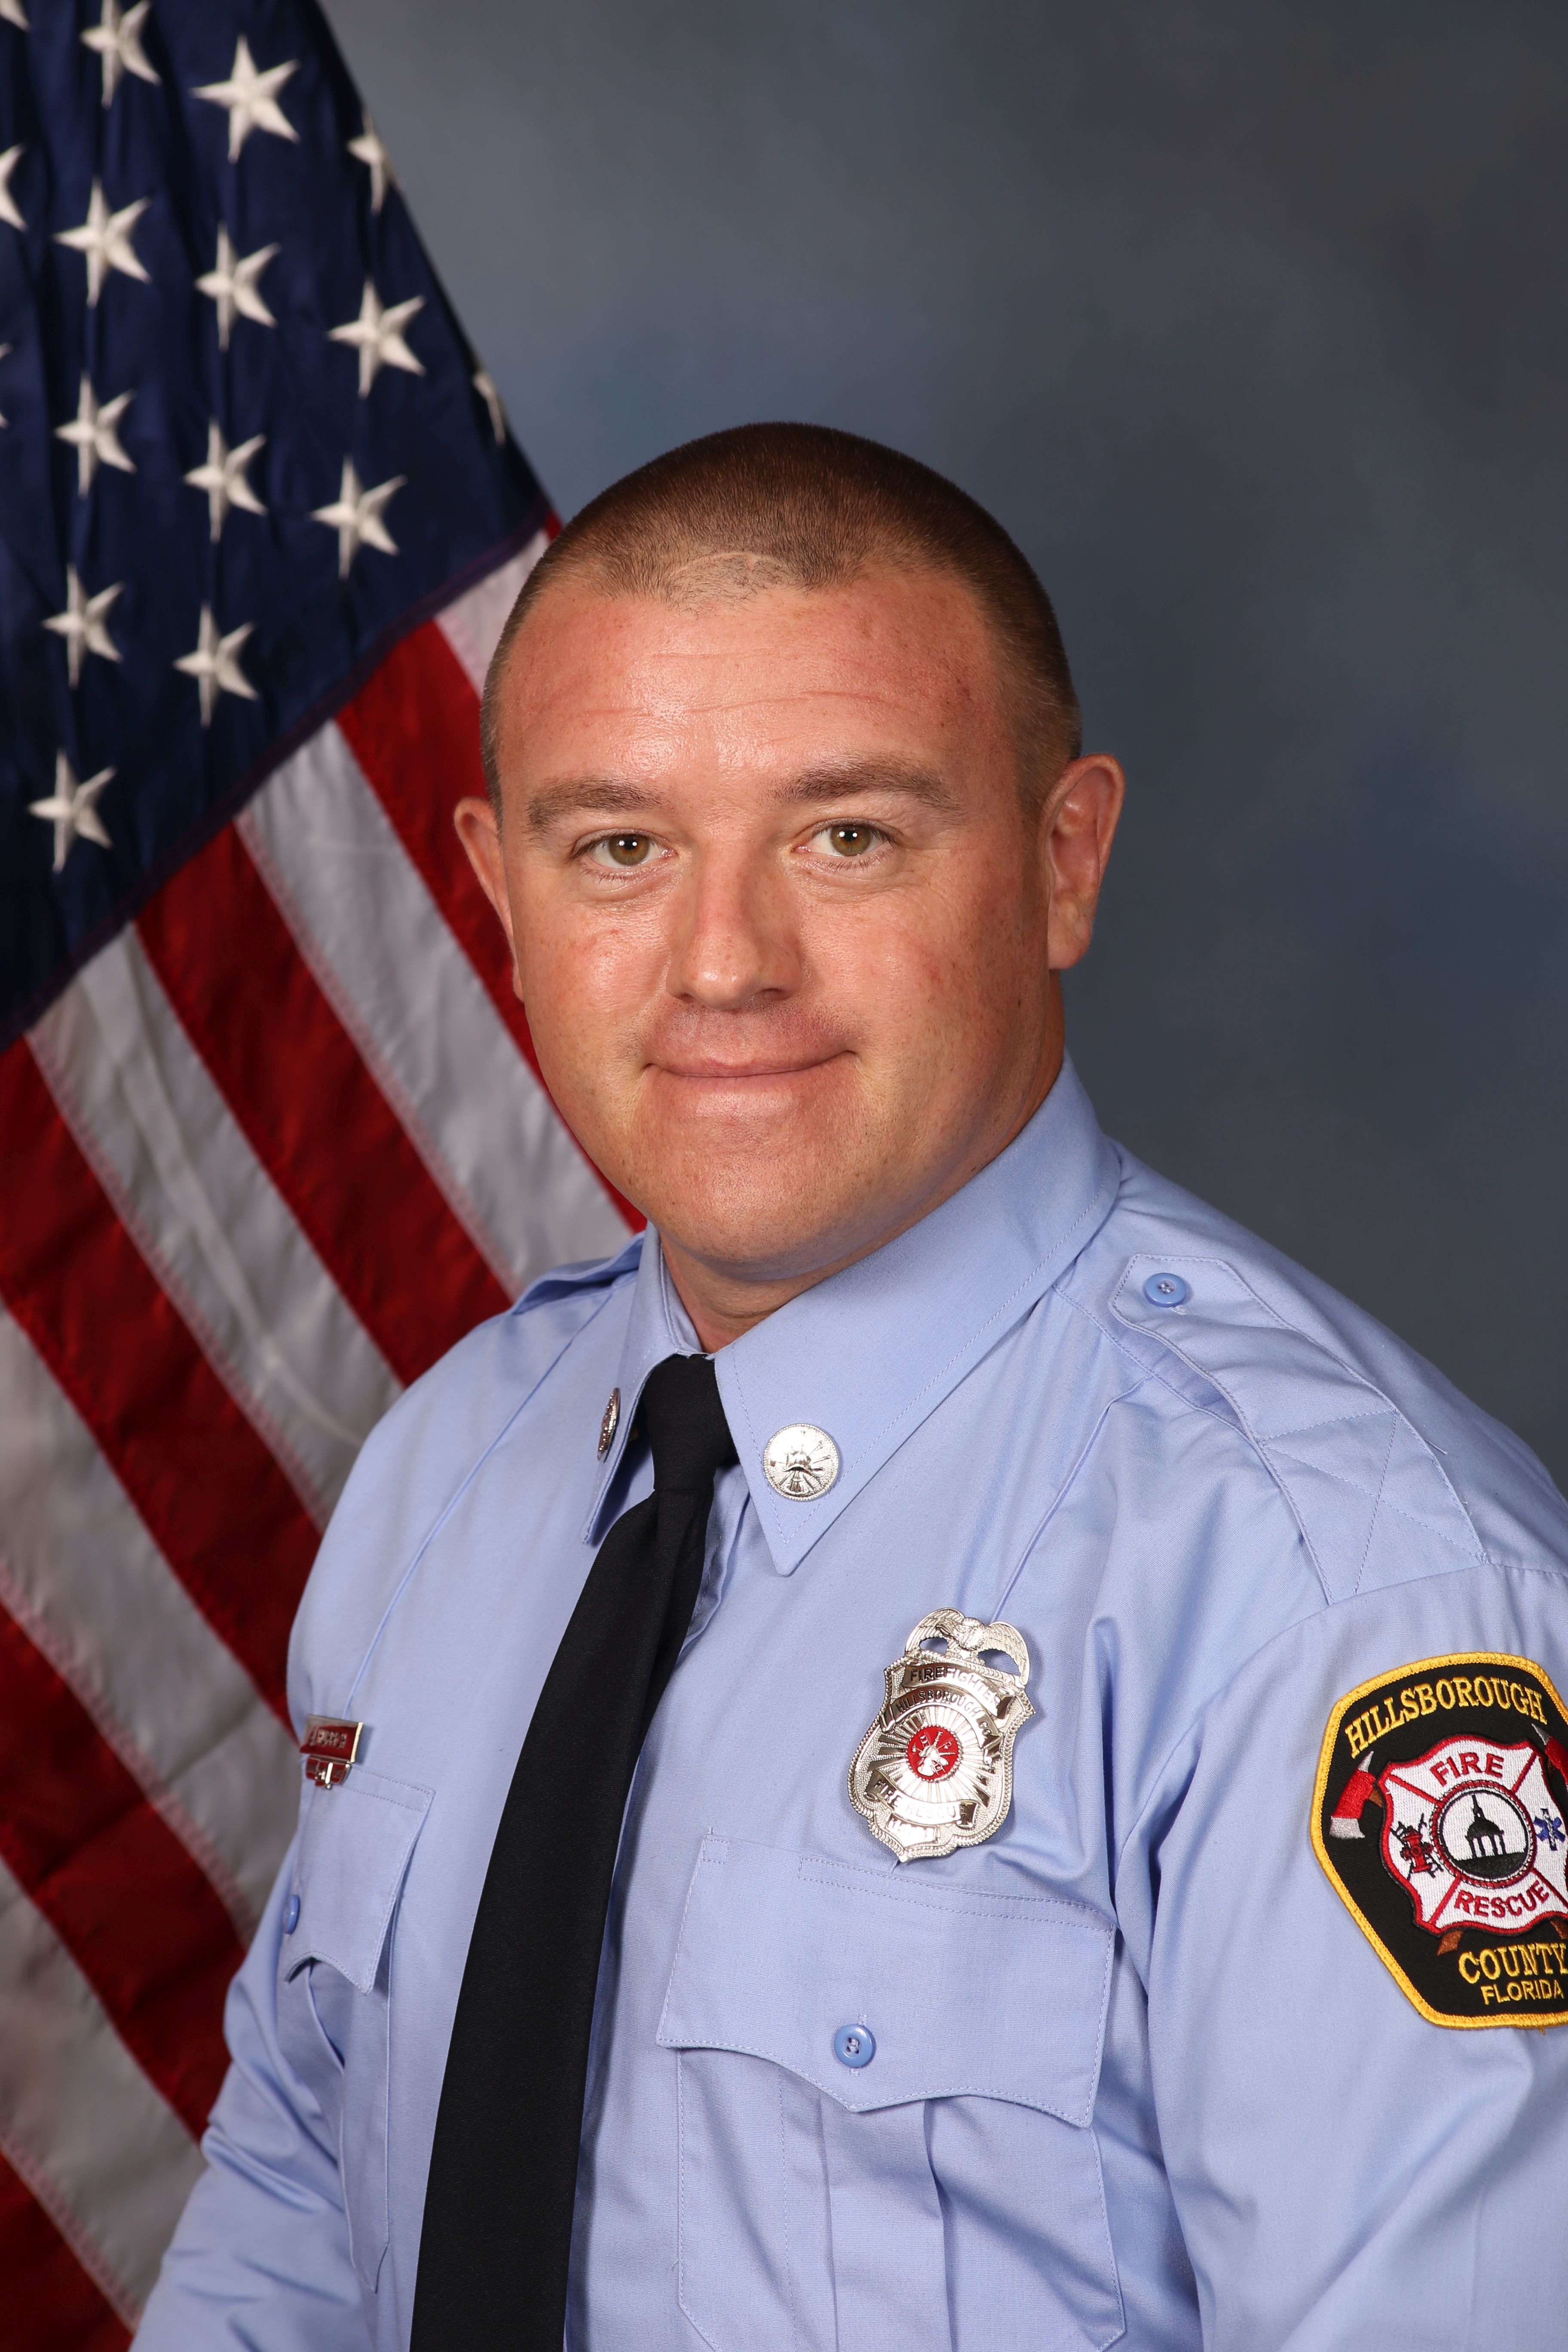 Hillborough County firefighter and paramedic, Jared Huprich